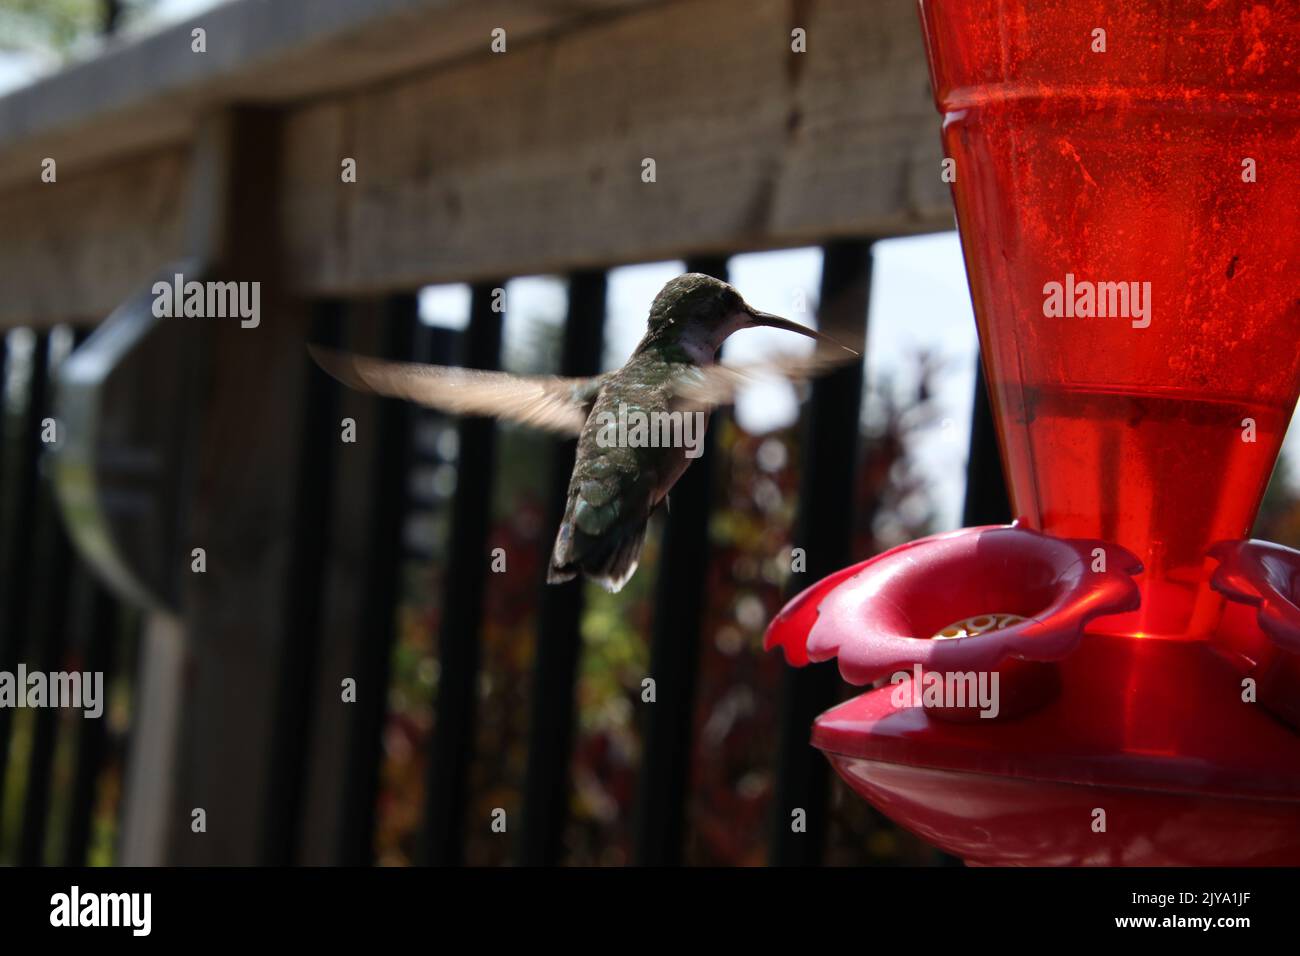 An Anna's hummingbird hovering in front of a red plastic feeder Stock Photo